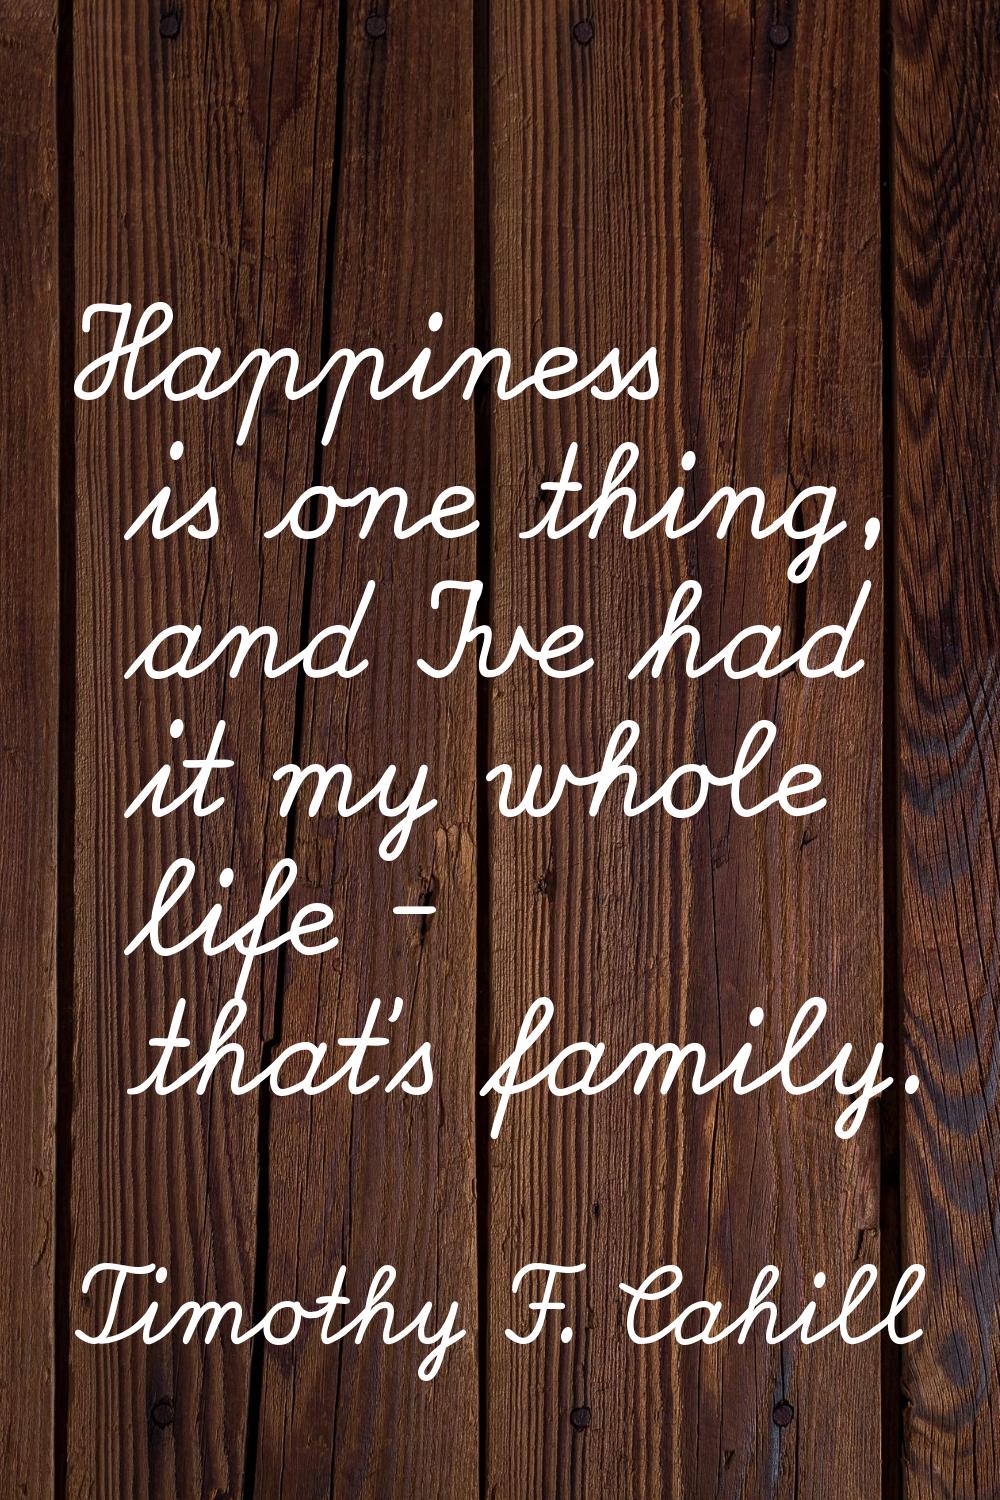 Happiness is one thing, and I've had it my whole life - that's family.